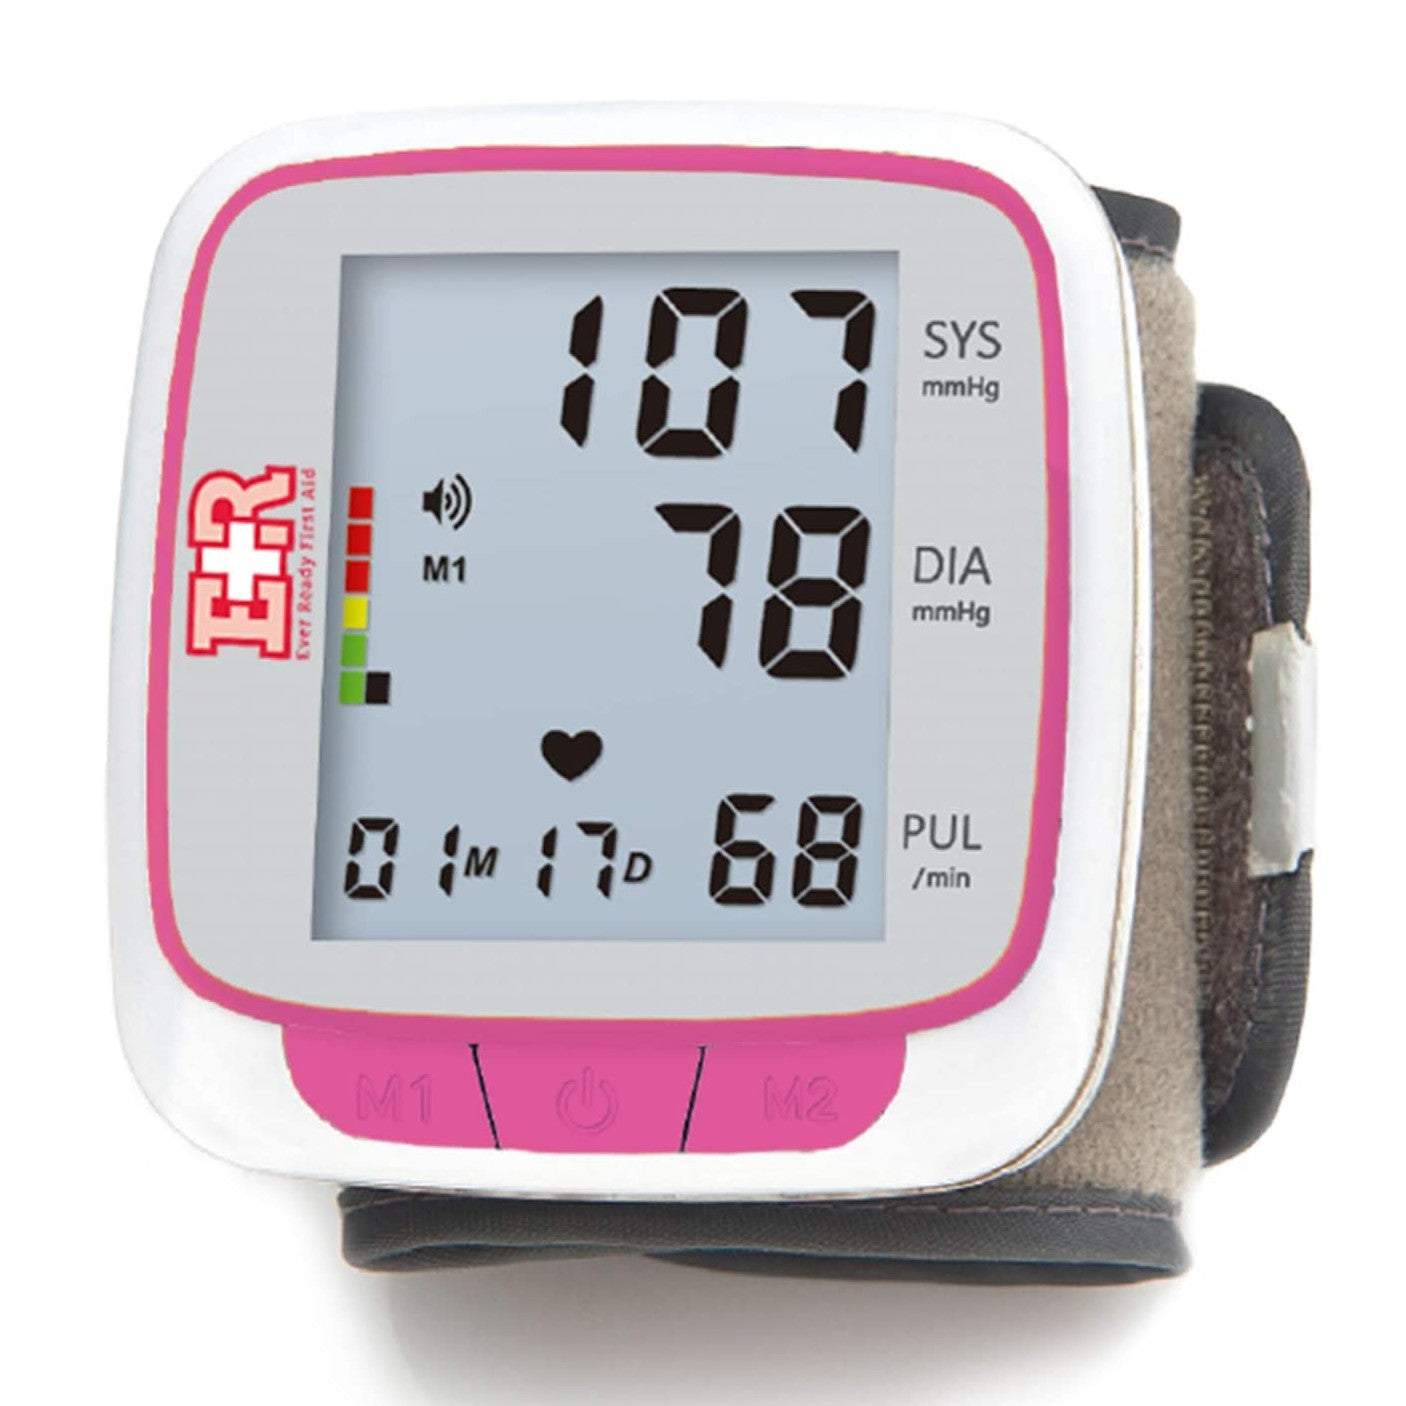 Blood Pressure Monitors for Home Use,Extra Large Upper Arm Blood Pressure  Cuff Automatic Blood Pressure Machine, Rechargeable Blood Pressure Monitors  with Large VA Display - Coupon Codes, Promo Codes, Daily Deals, Save